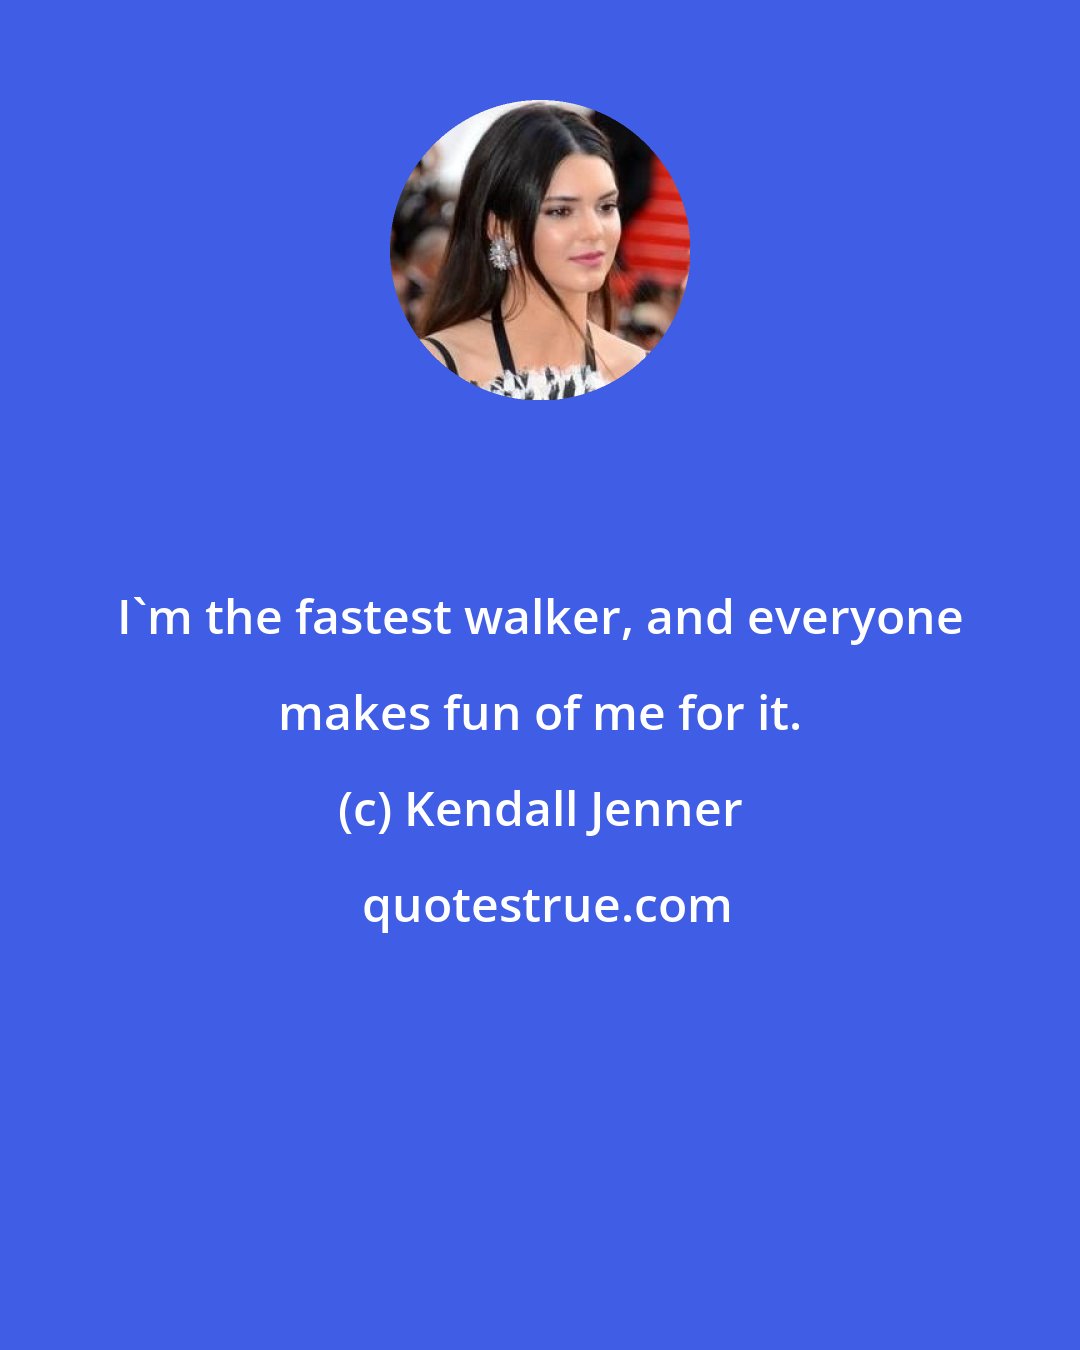 Kendall Jenner: I'm the fastest walker, and everyone makes fun of me for it.